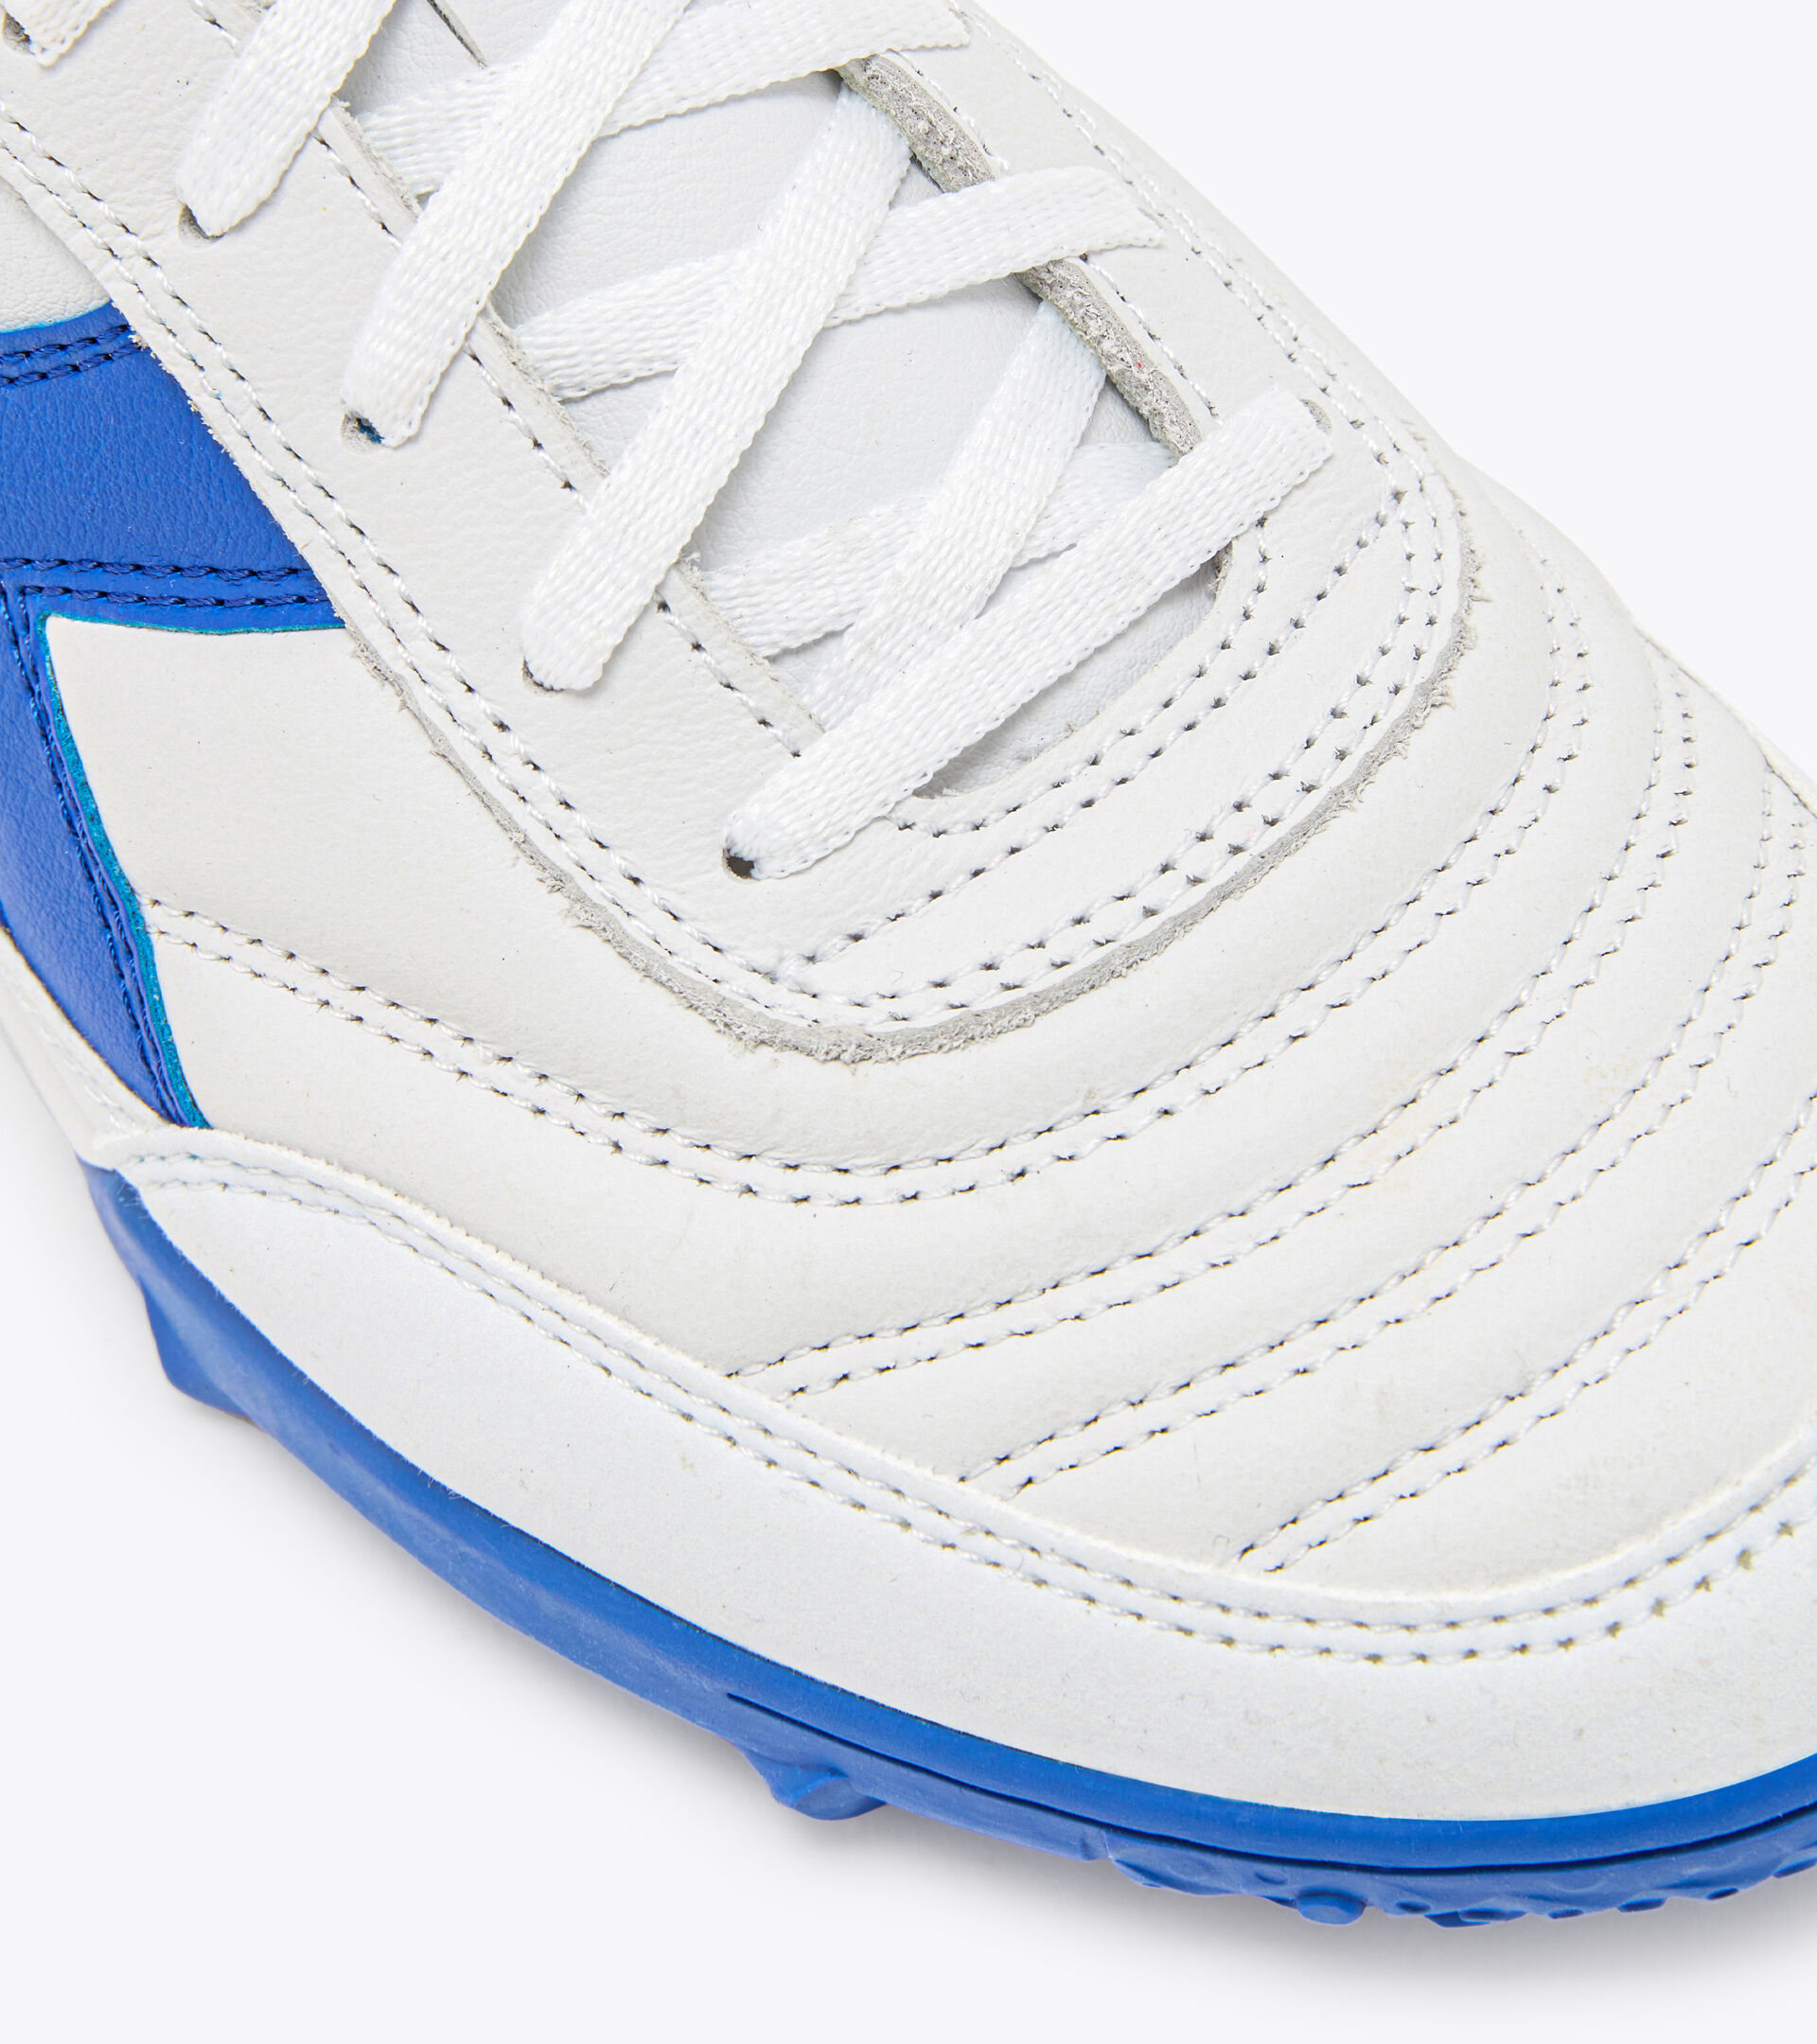 Futsal boot - Specific outsole for synthetic/hard grounds CALCETTO II LT TF OPTICAL WHITE/ROYAL BLUE - Diadora